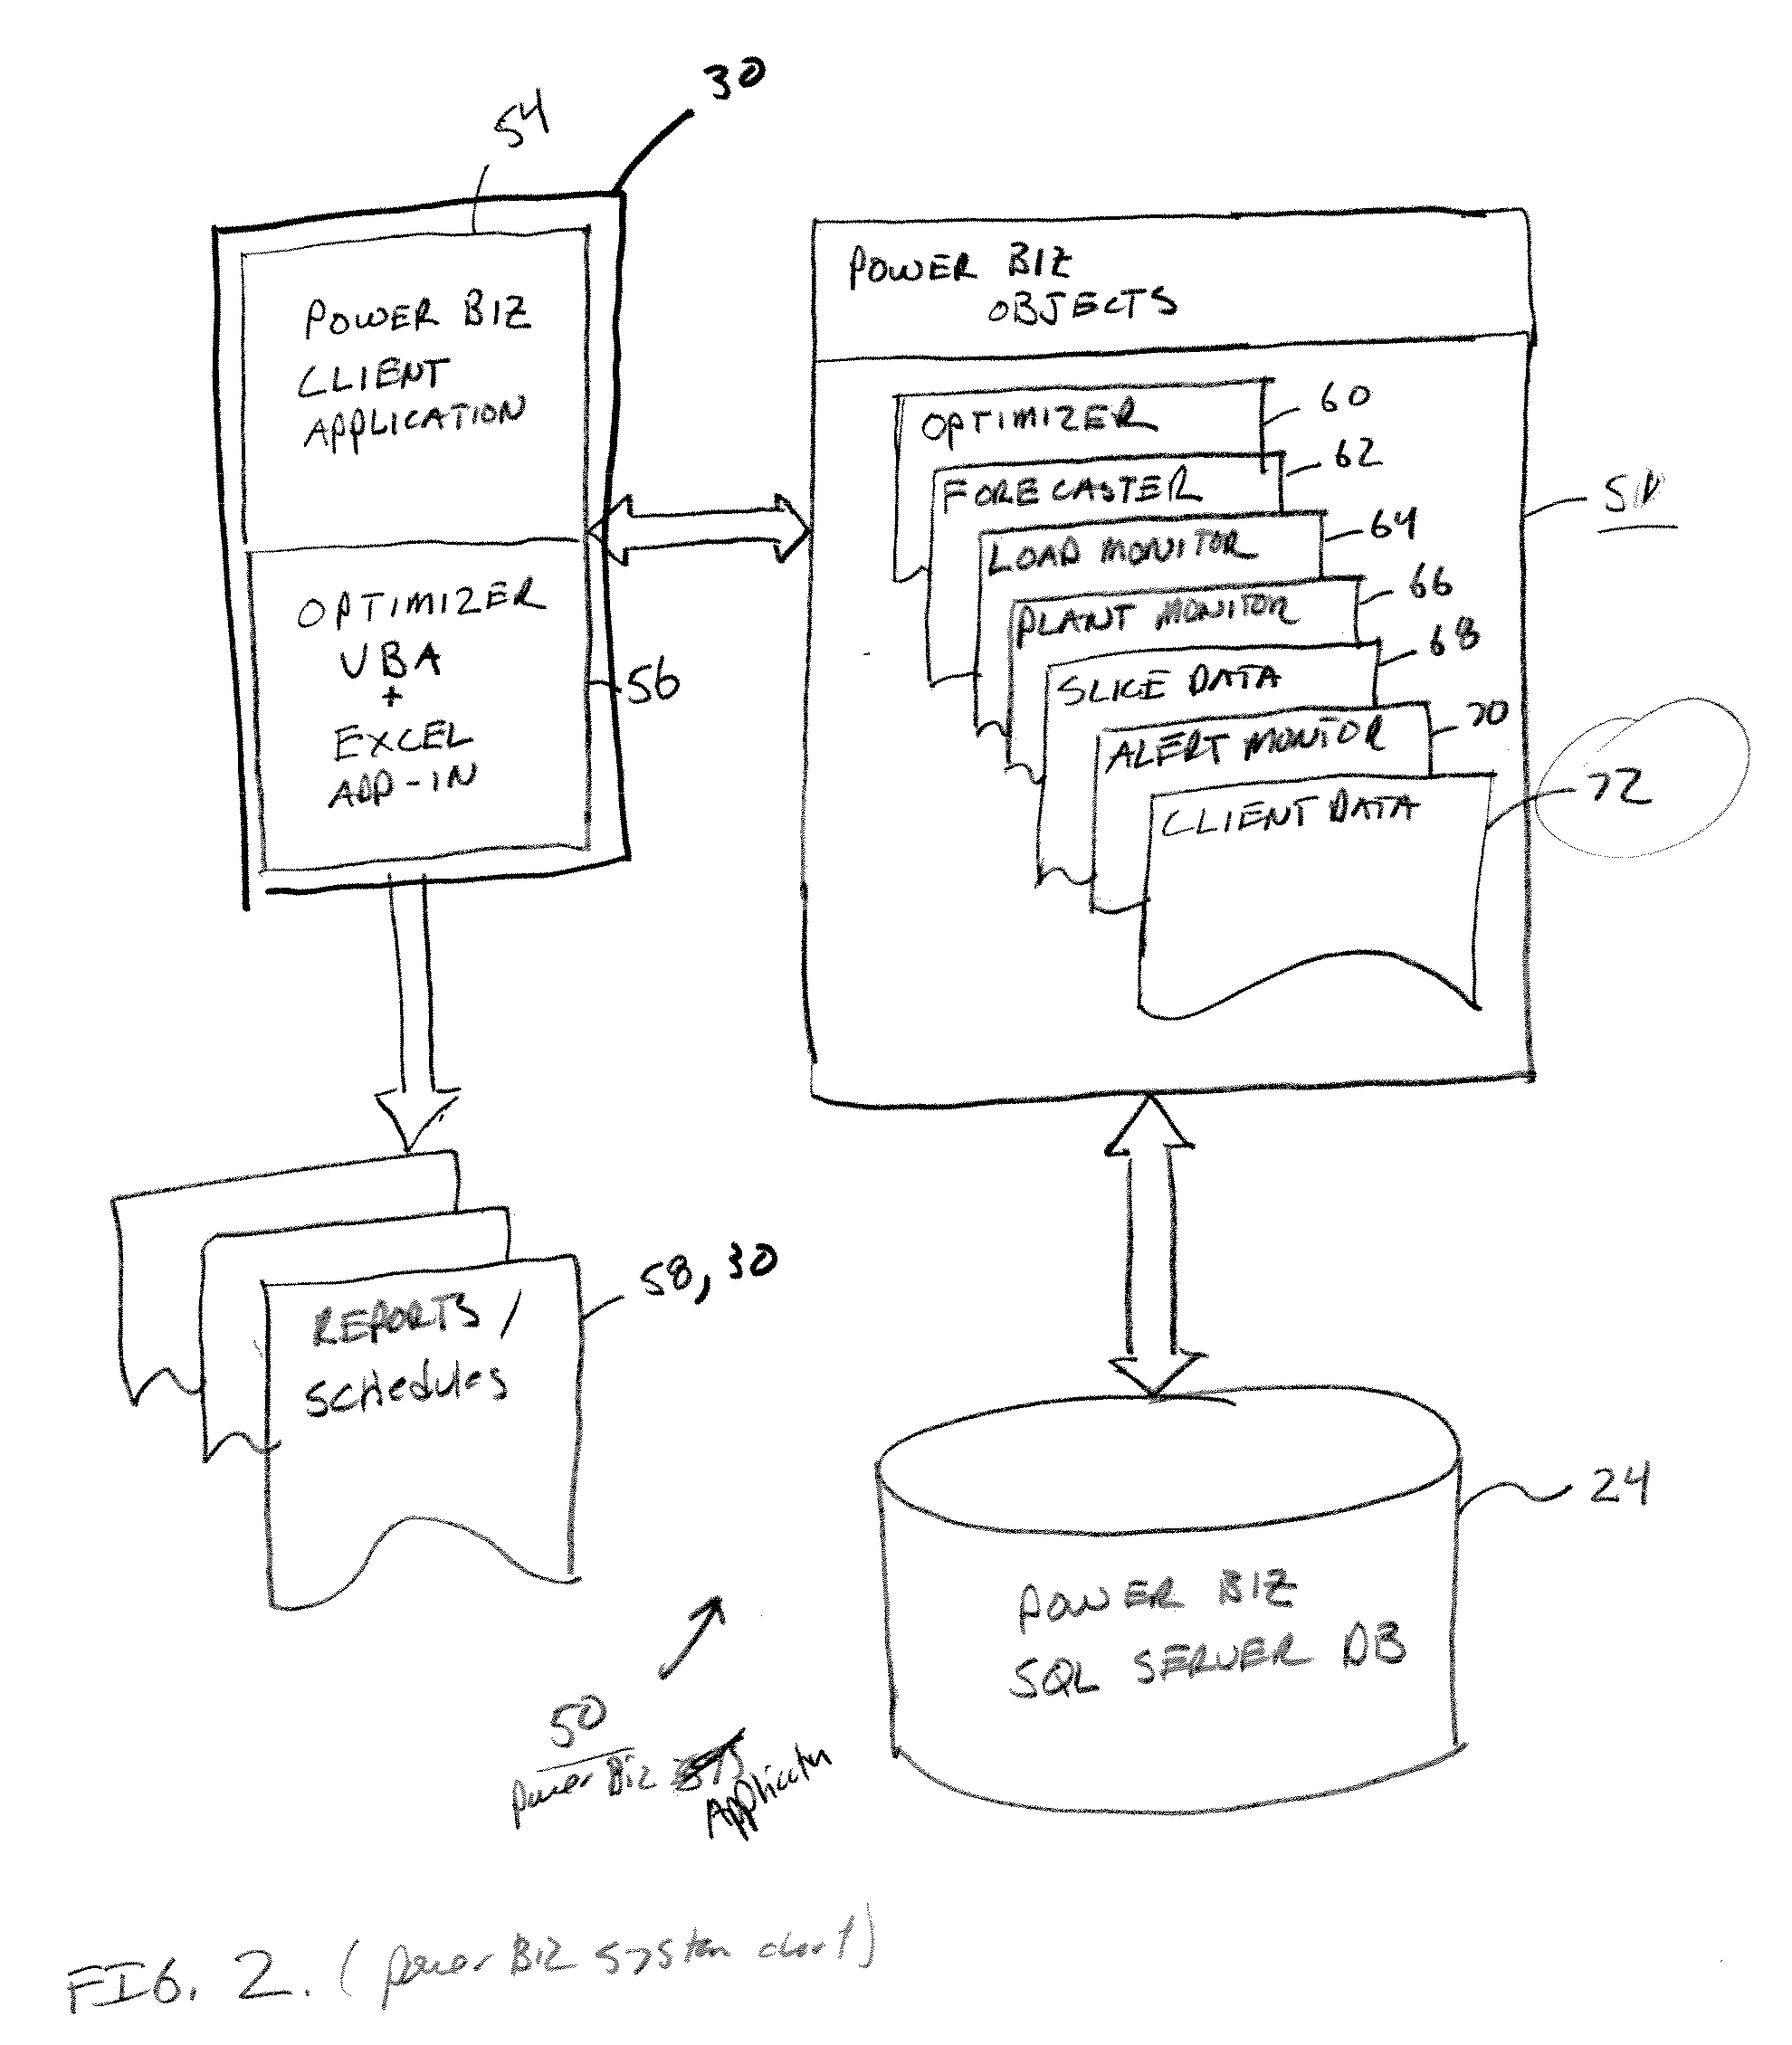 System and method for managing and optimizing power use